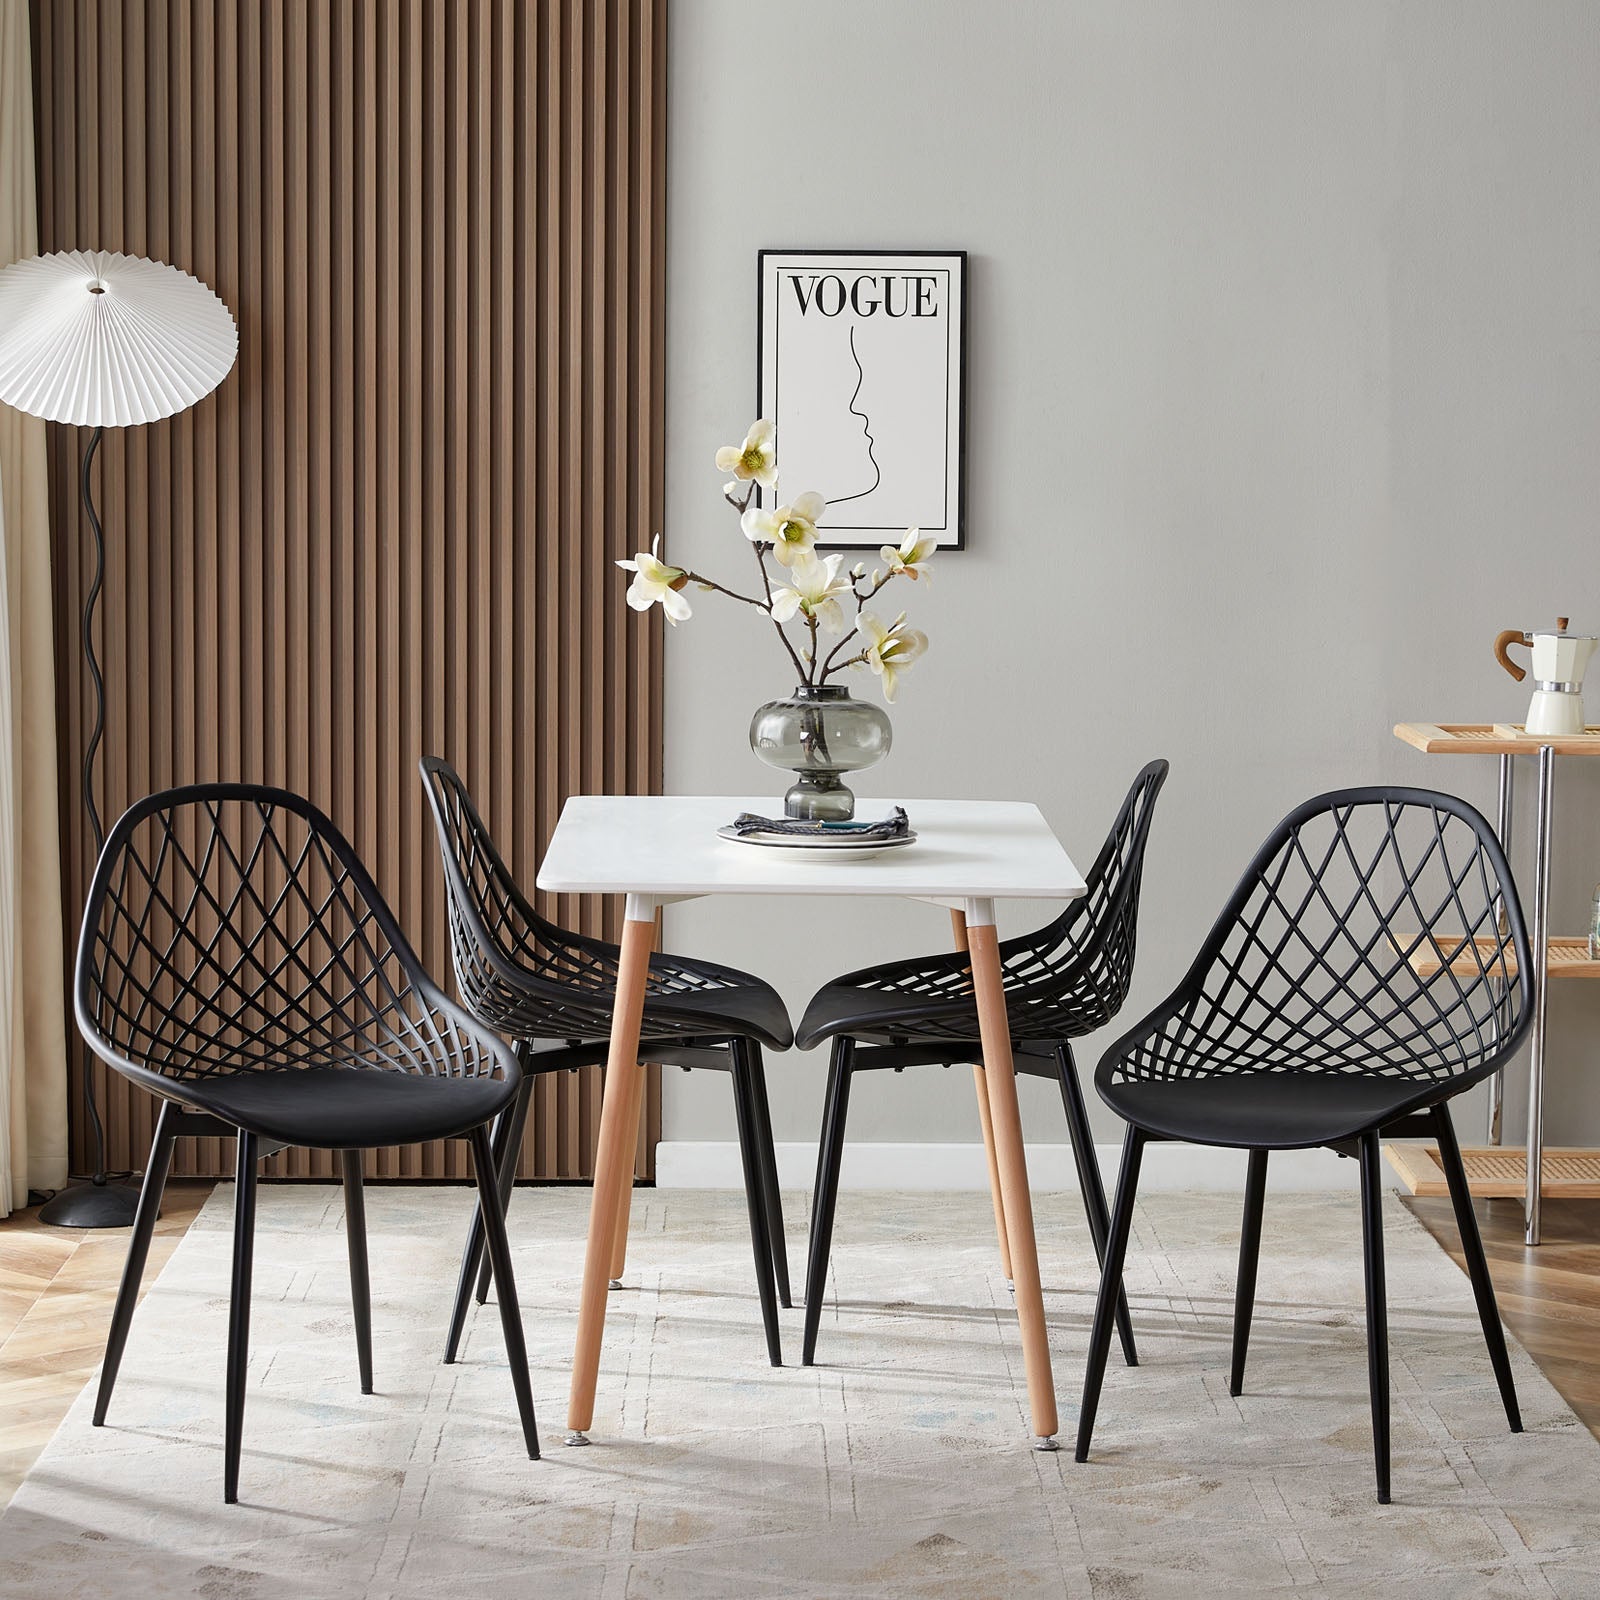 MILAN Dining Chairs with Metal Legs - White/Black